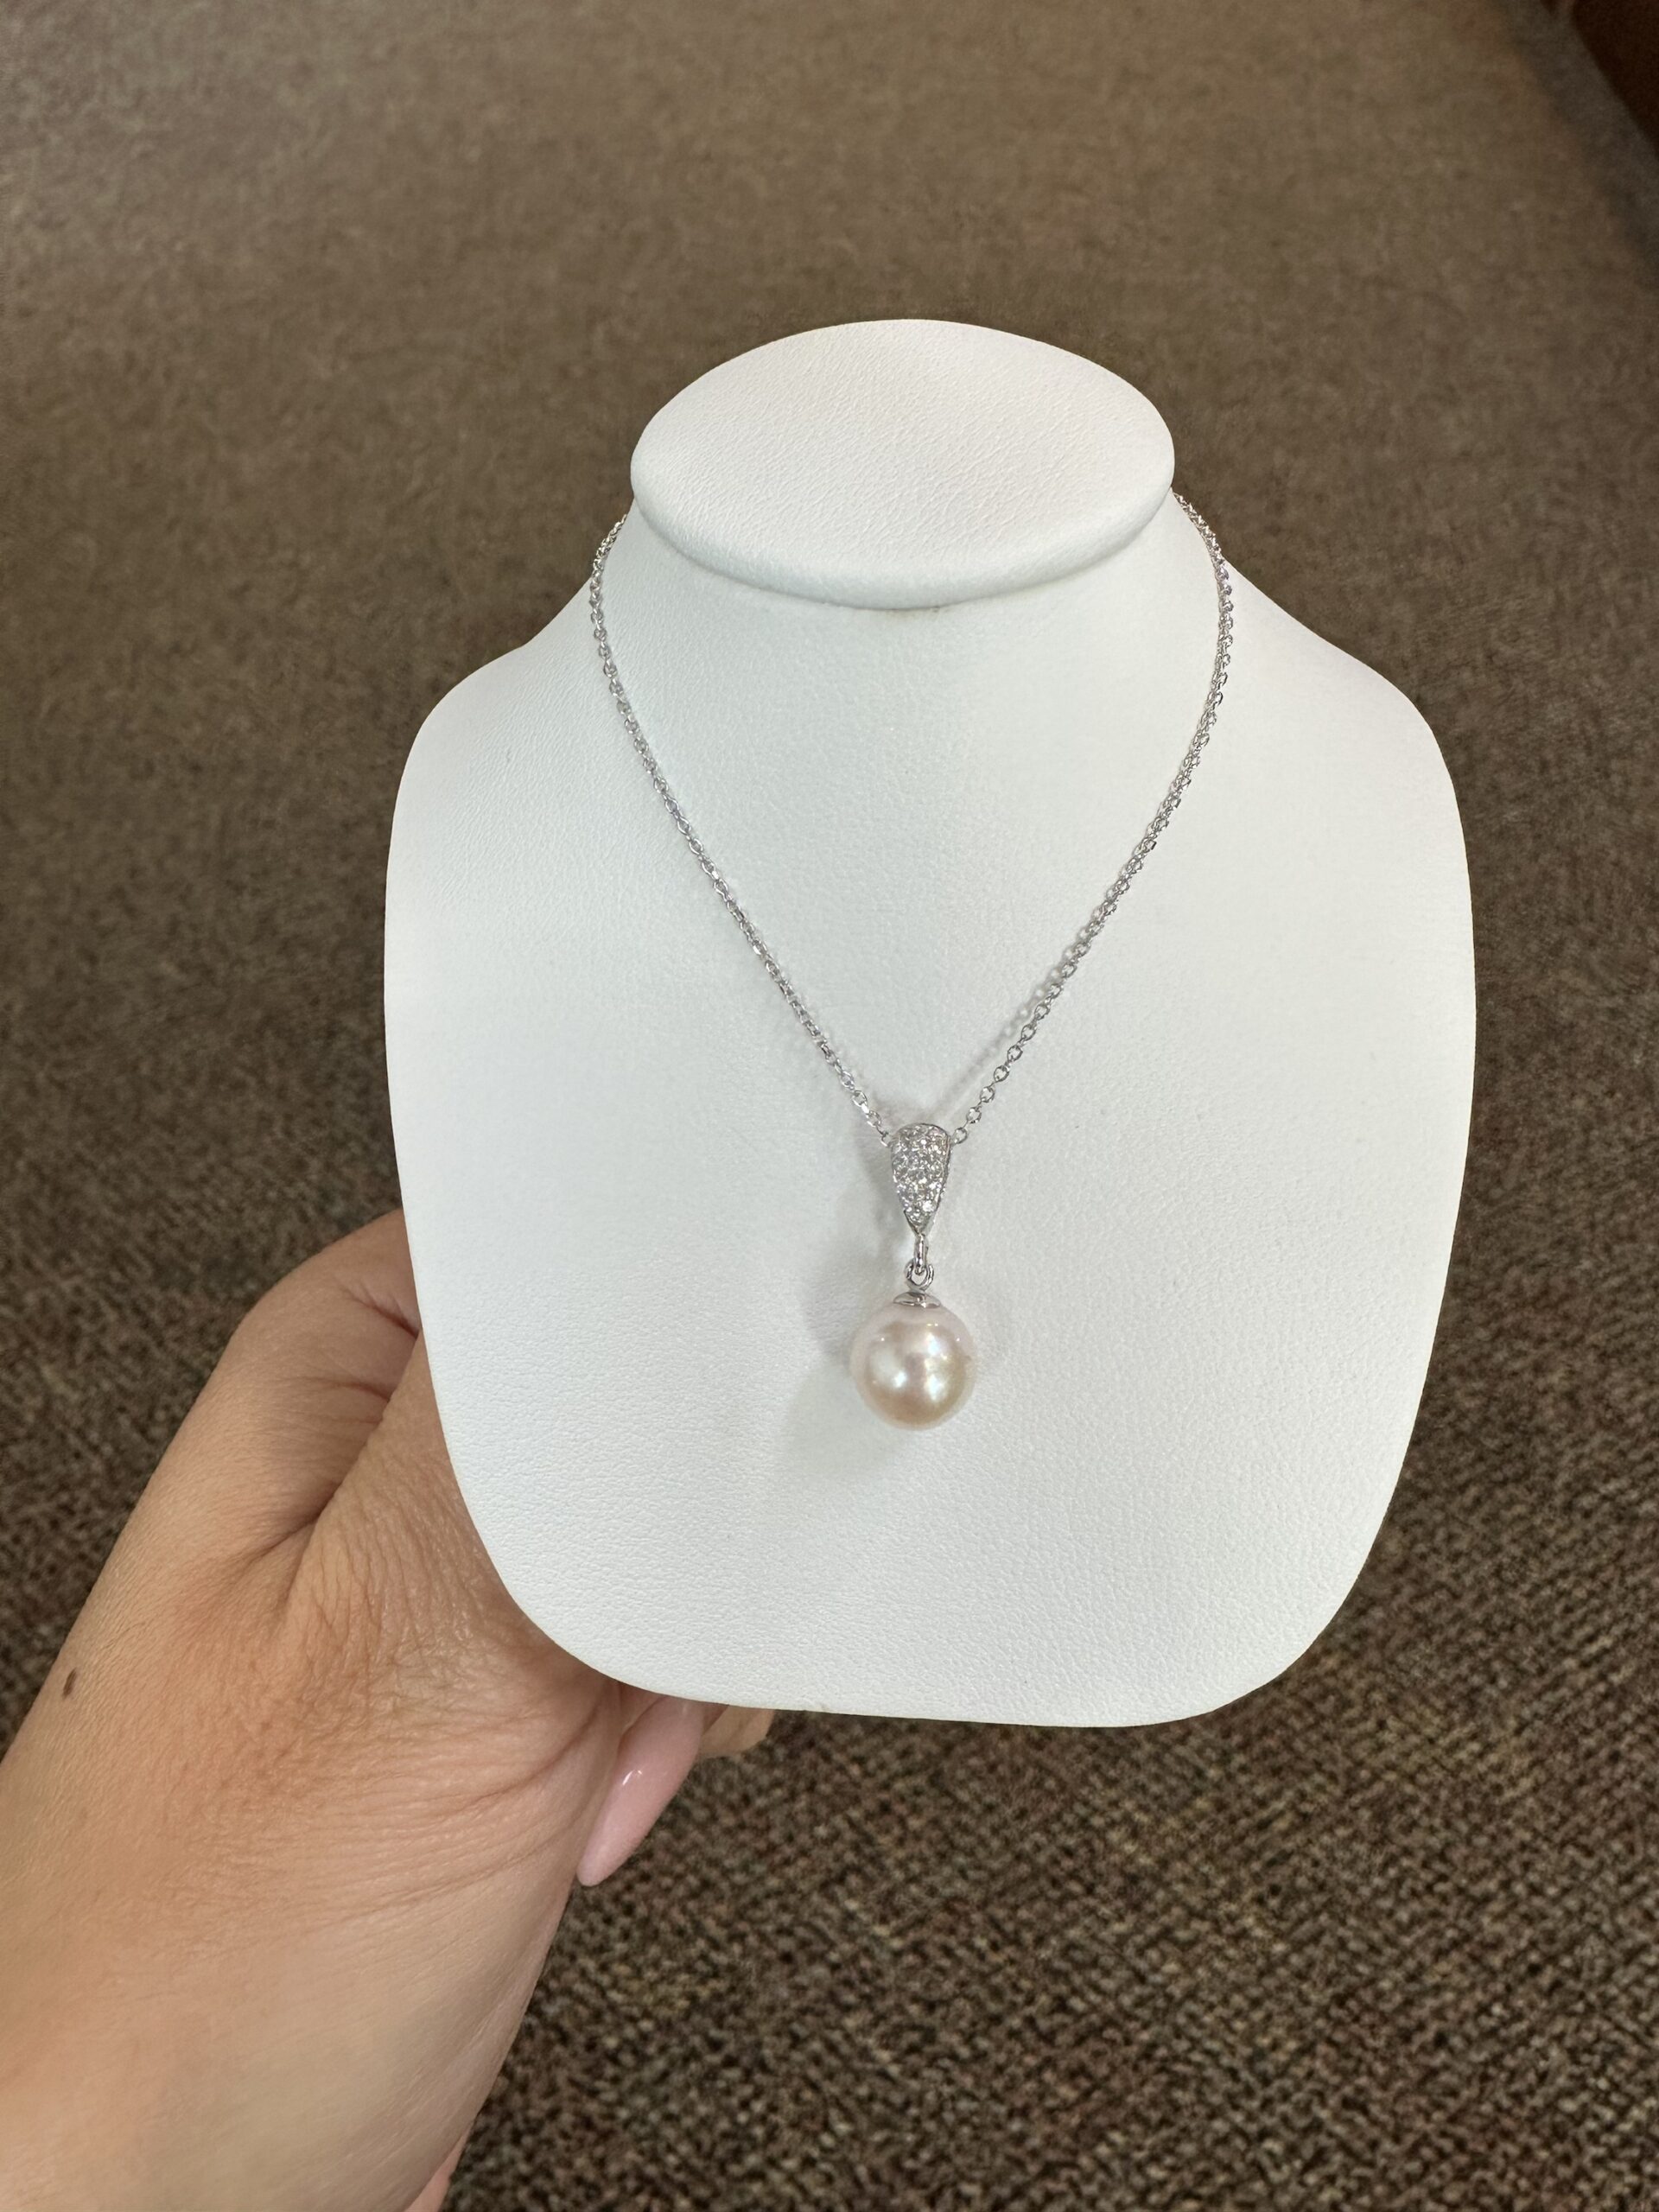 DENGGUANG Single Pearl Necklace Sterling Silver Freshwater India | Ubuy